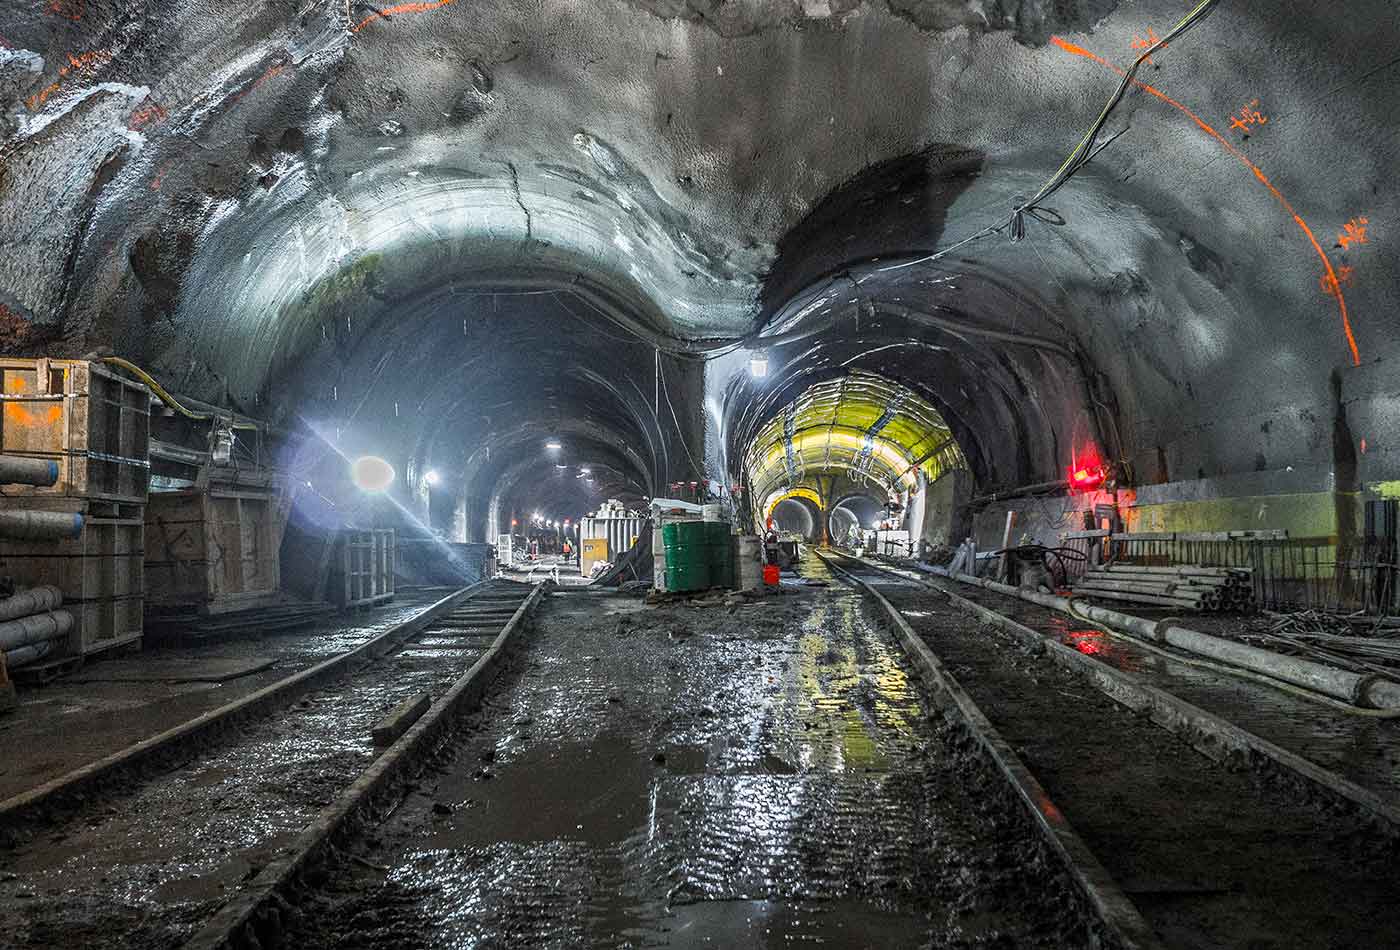 Work continues on the Manhattan side of the East Side Access Project below Grand Central Terminal.